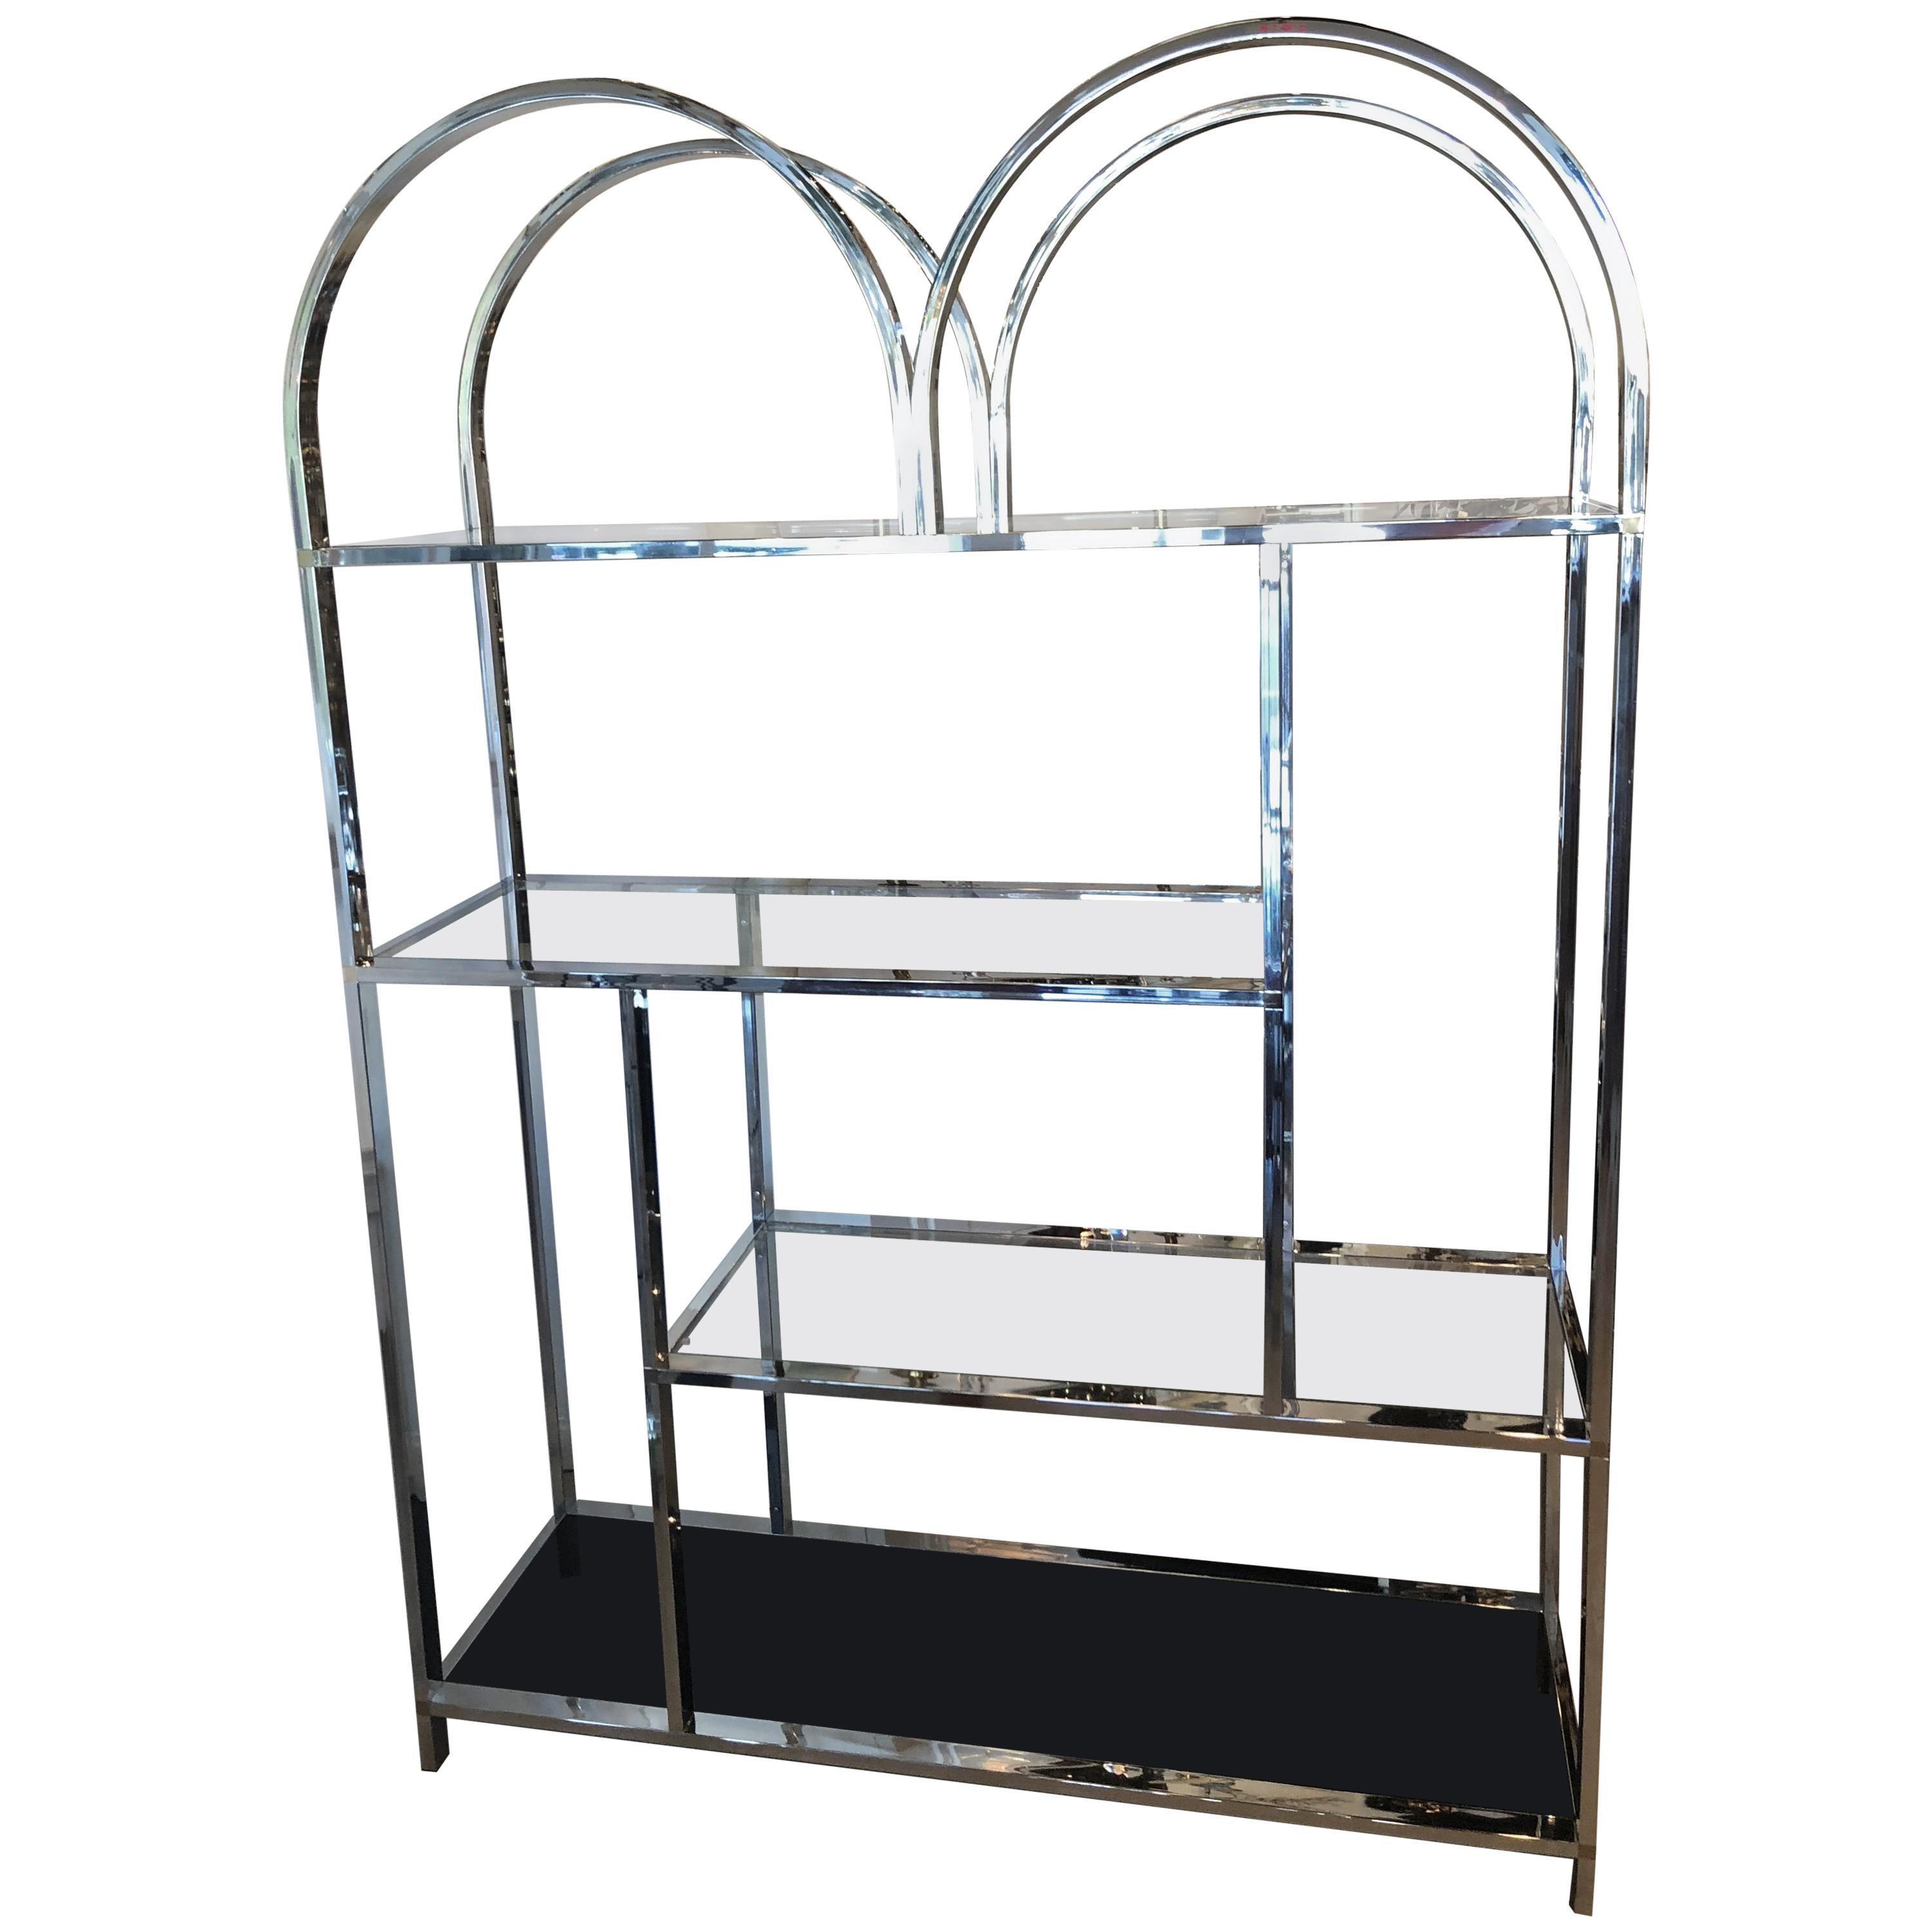 Vintage Chrome and Brass Etagere Arched Glass Display Shelf Shelves